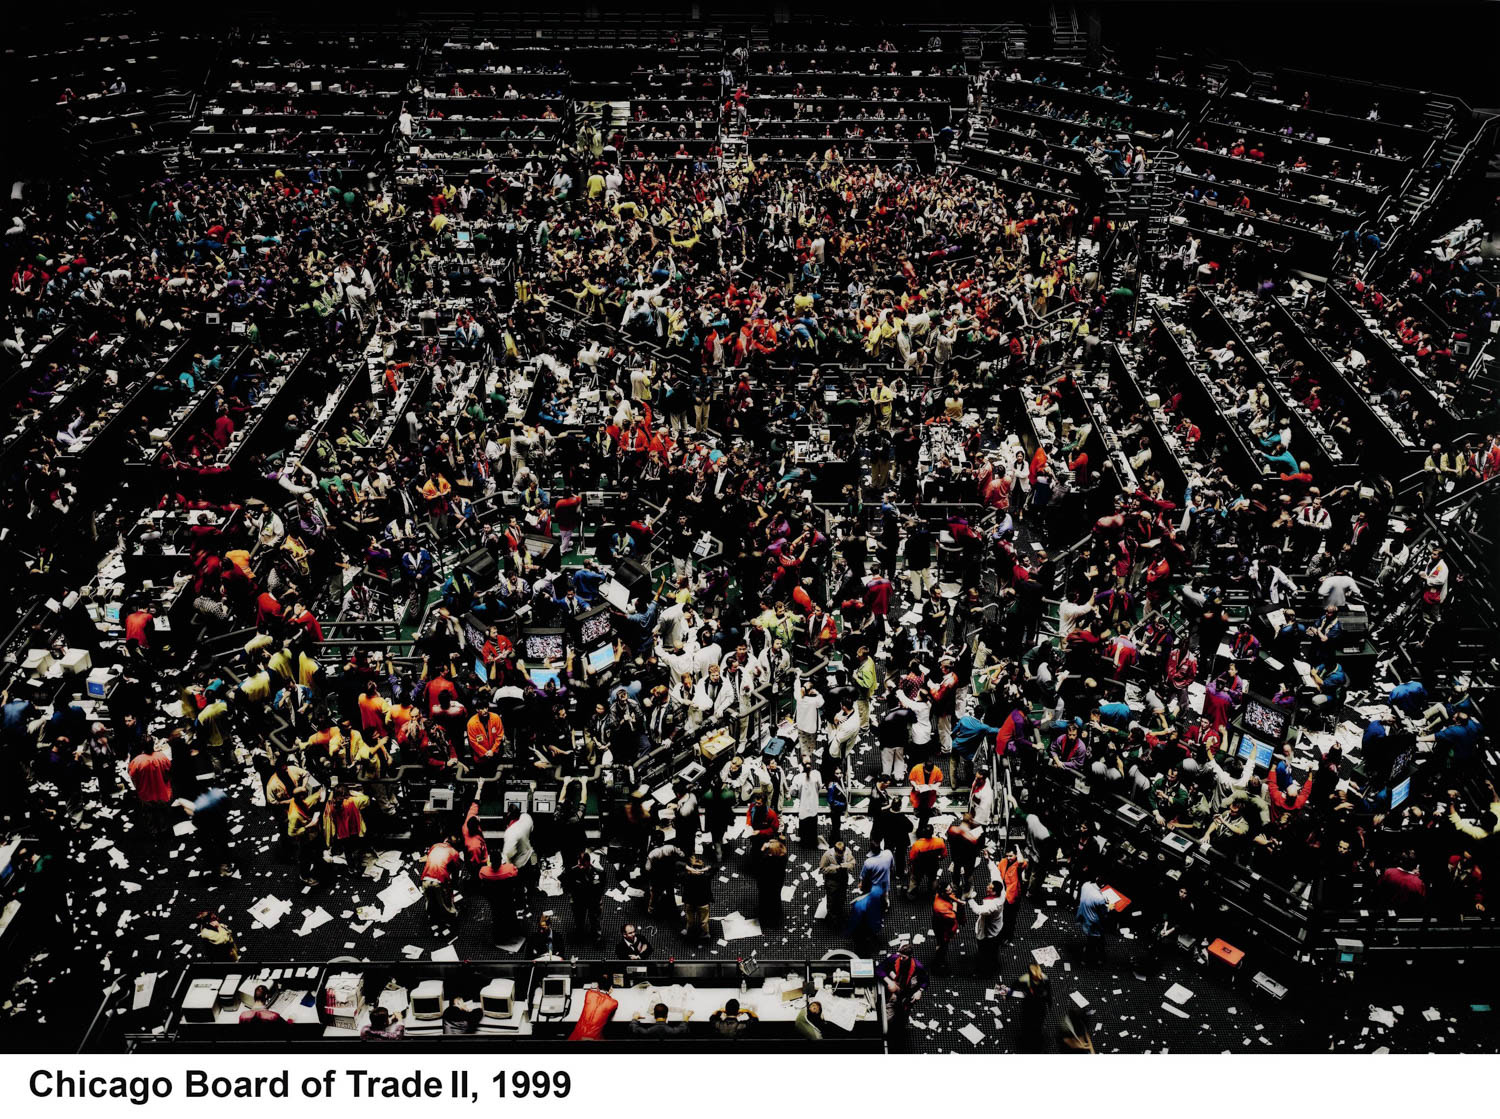 11 1999 Chicago Board of Trade II Andreas Gursky iFocus